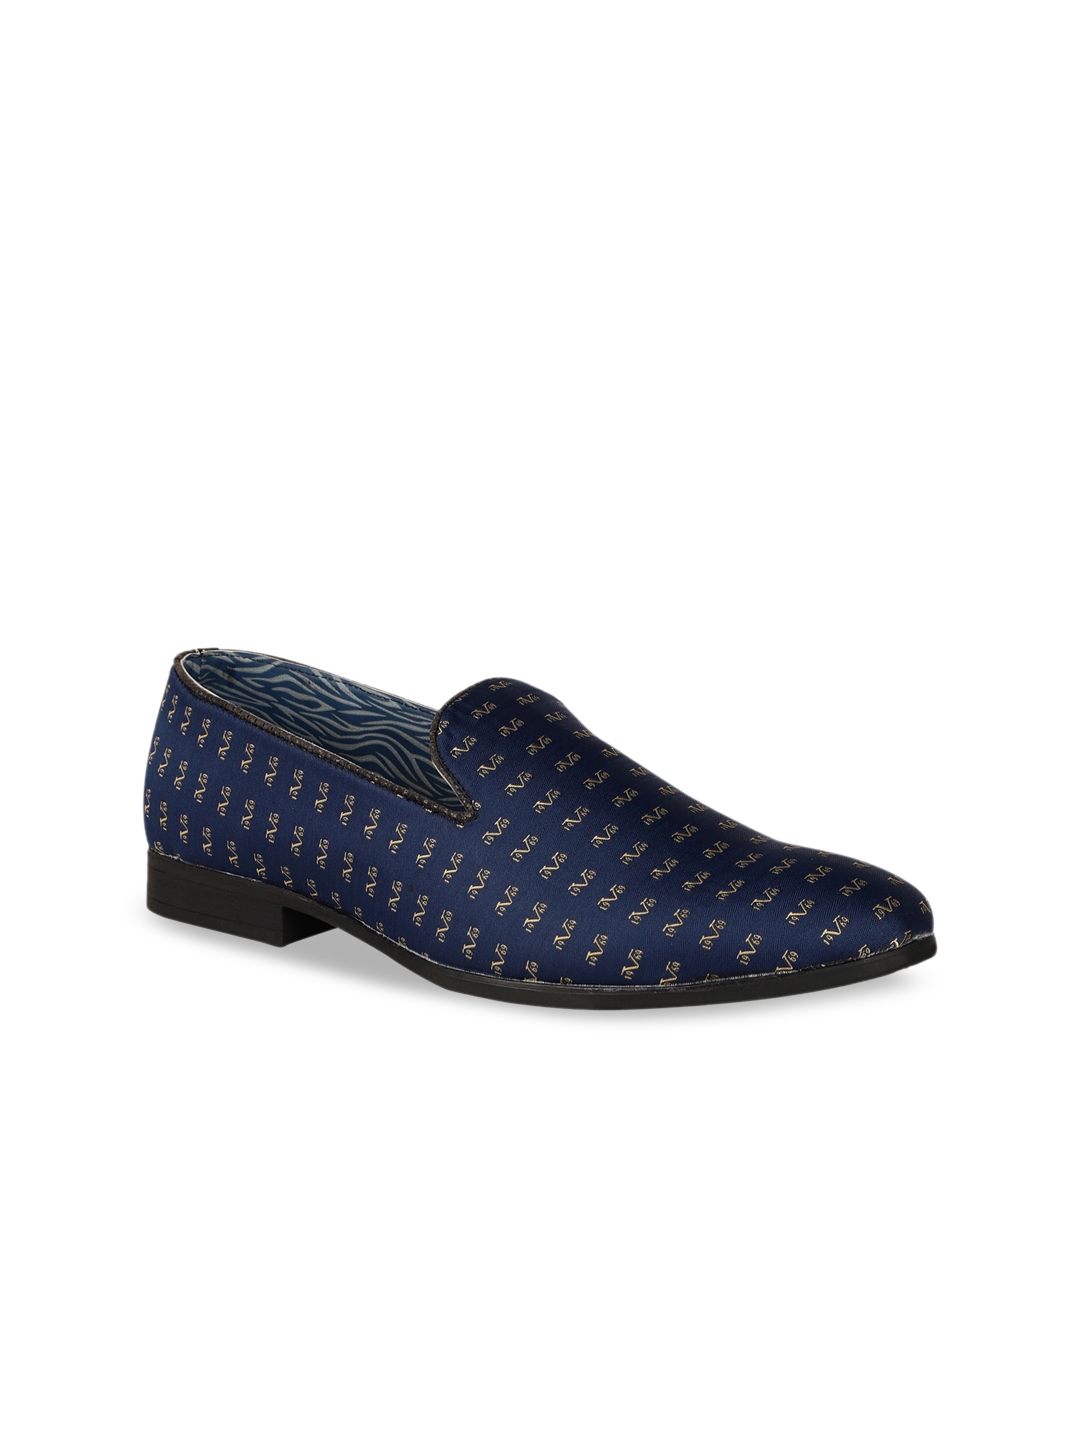 Buy Respiro Men Navy Blue Loafers - Casual Shoes for Men 10429442 | Myntra